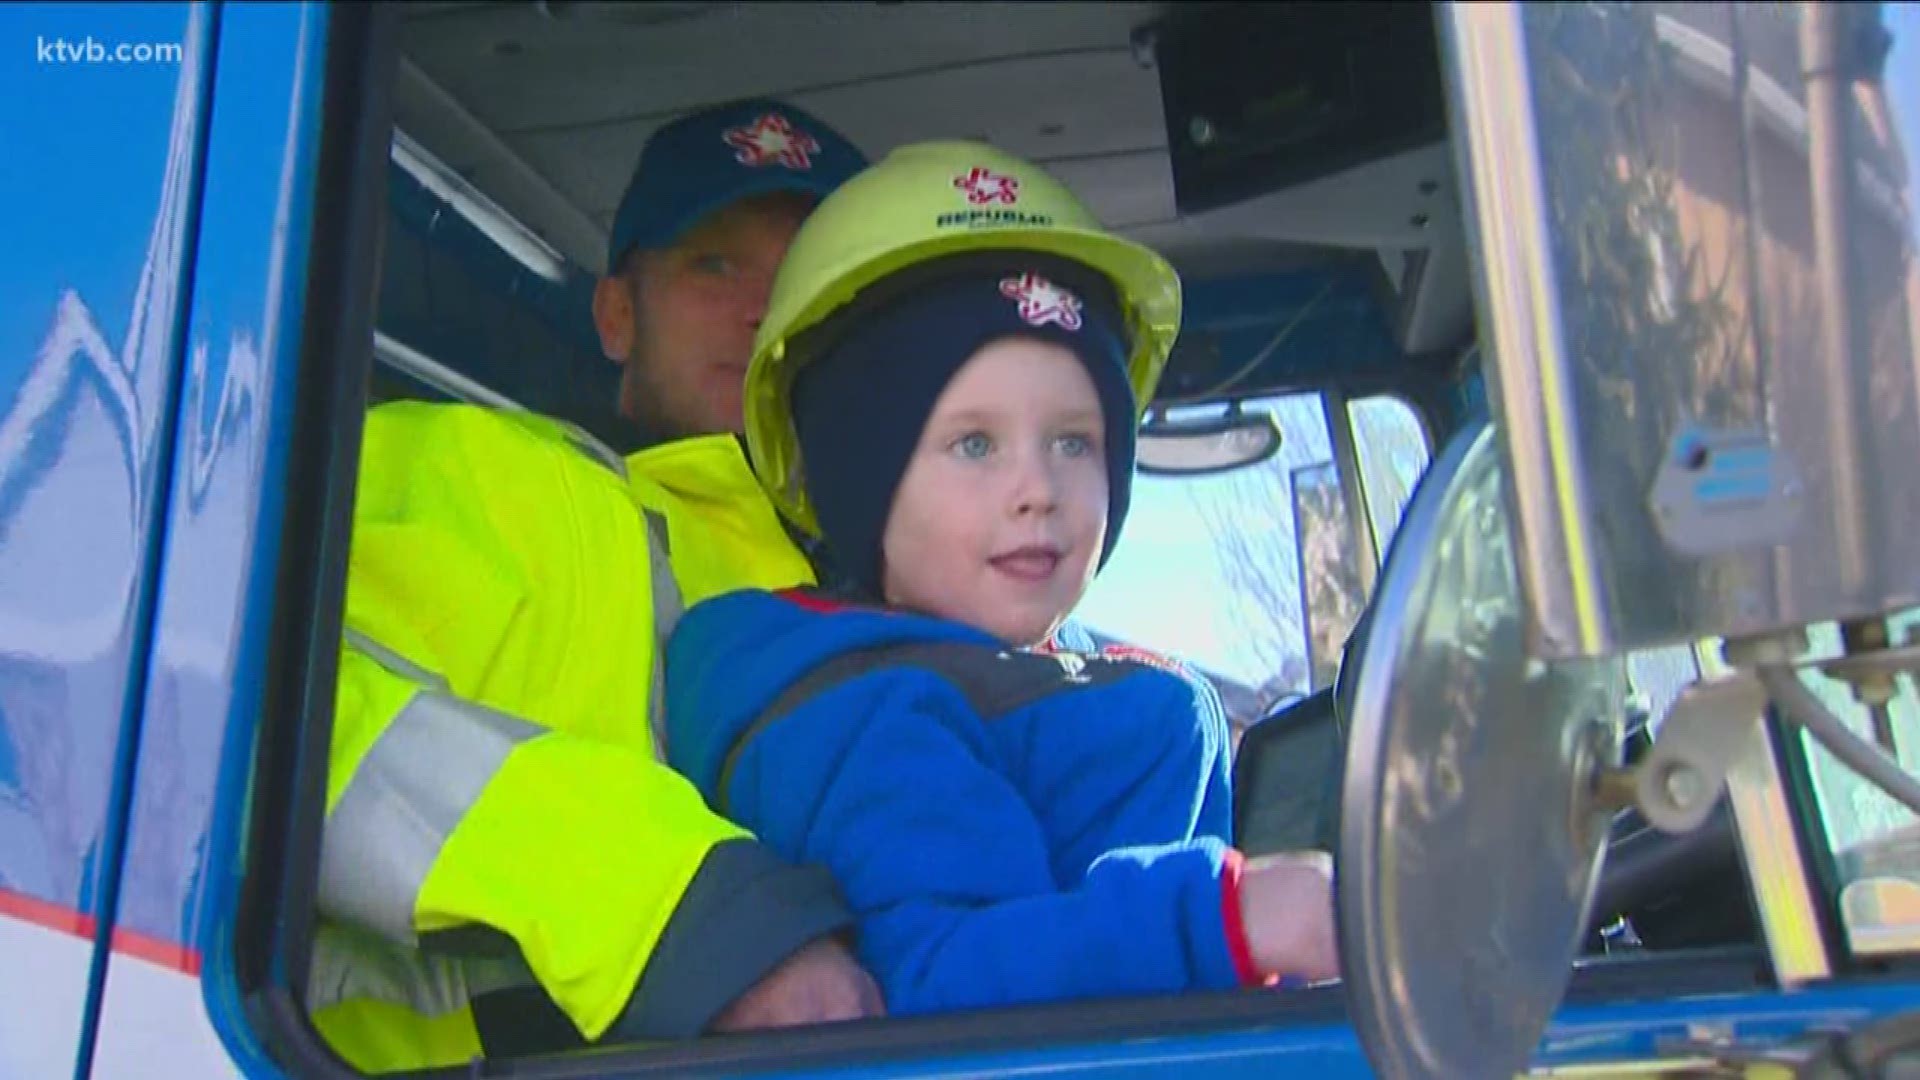 Four-year-old Harrison Ronk is a huge fan of garbage trucks, as well as the guys who drive the trucks and pick up the trash from in front of his family's Meridian home.